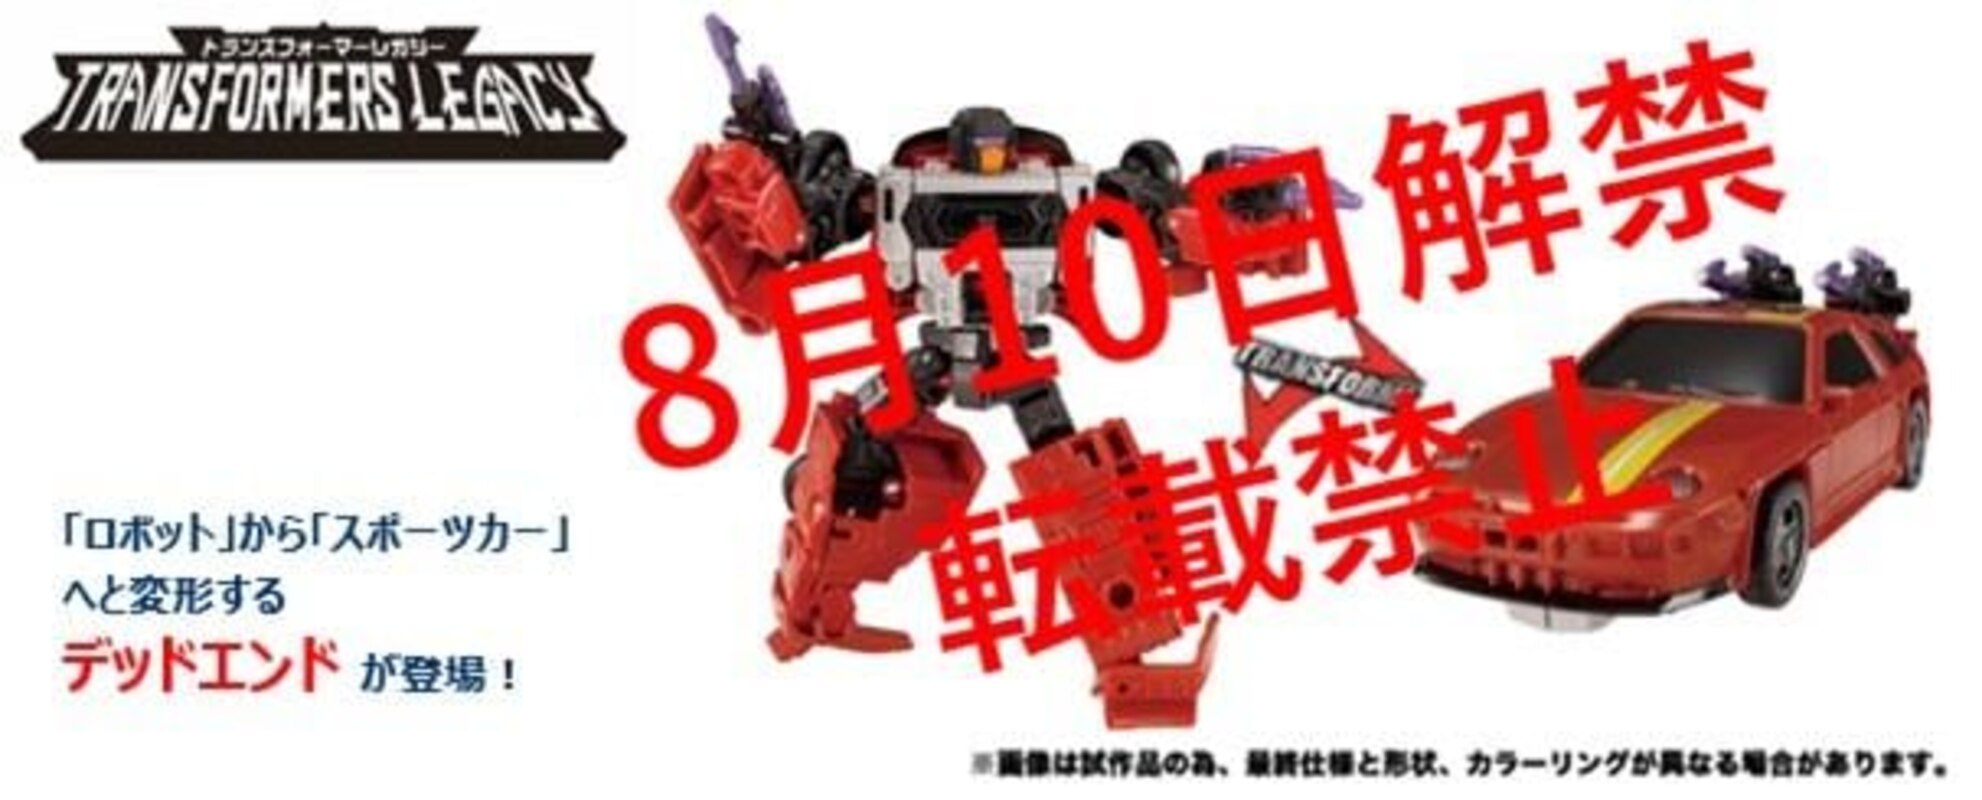 Takara Transformers Legacy Dead End and Pointblank with Peacemaker New Images